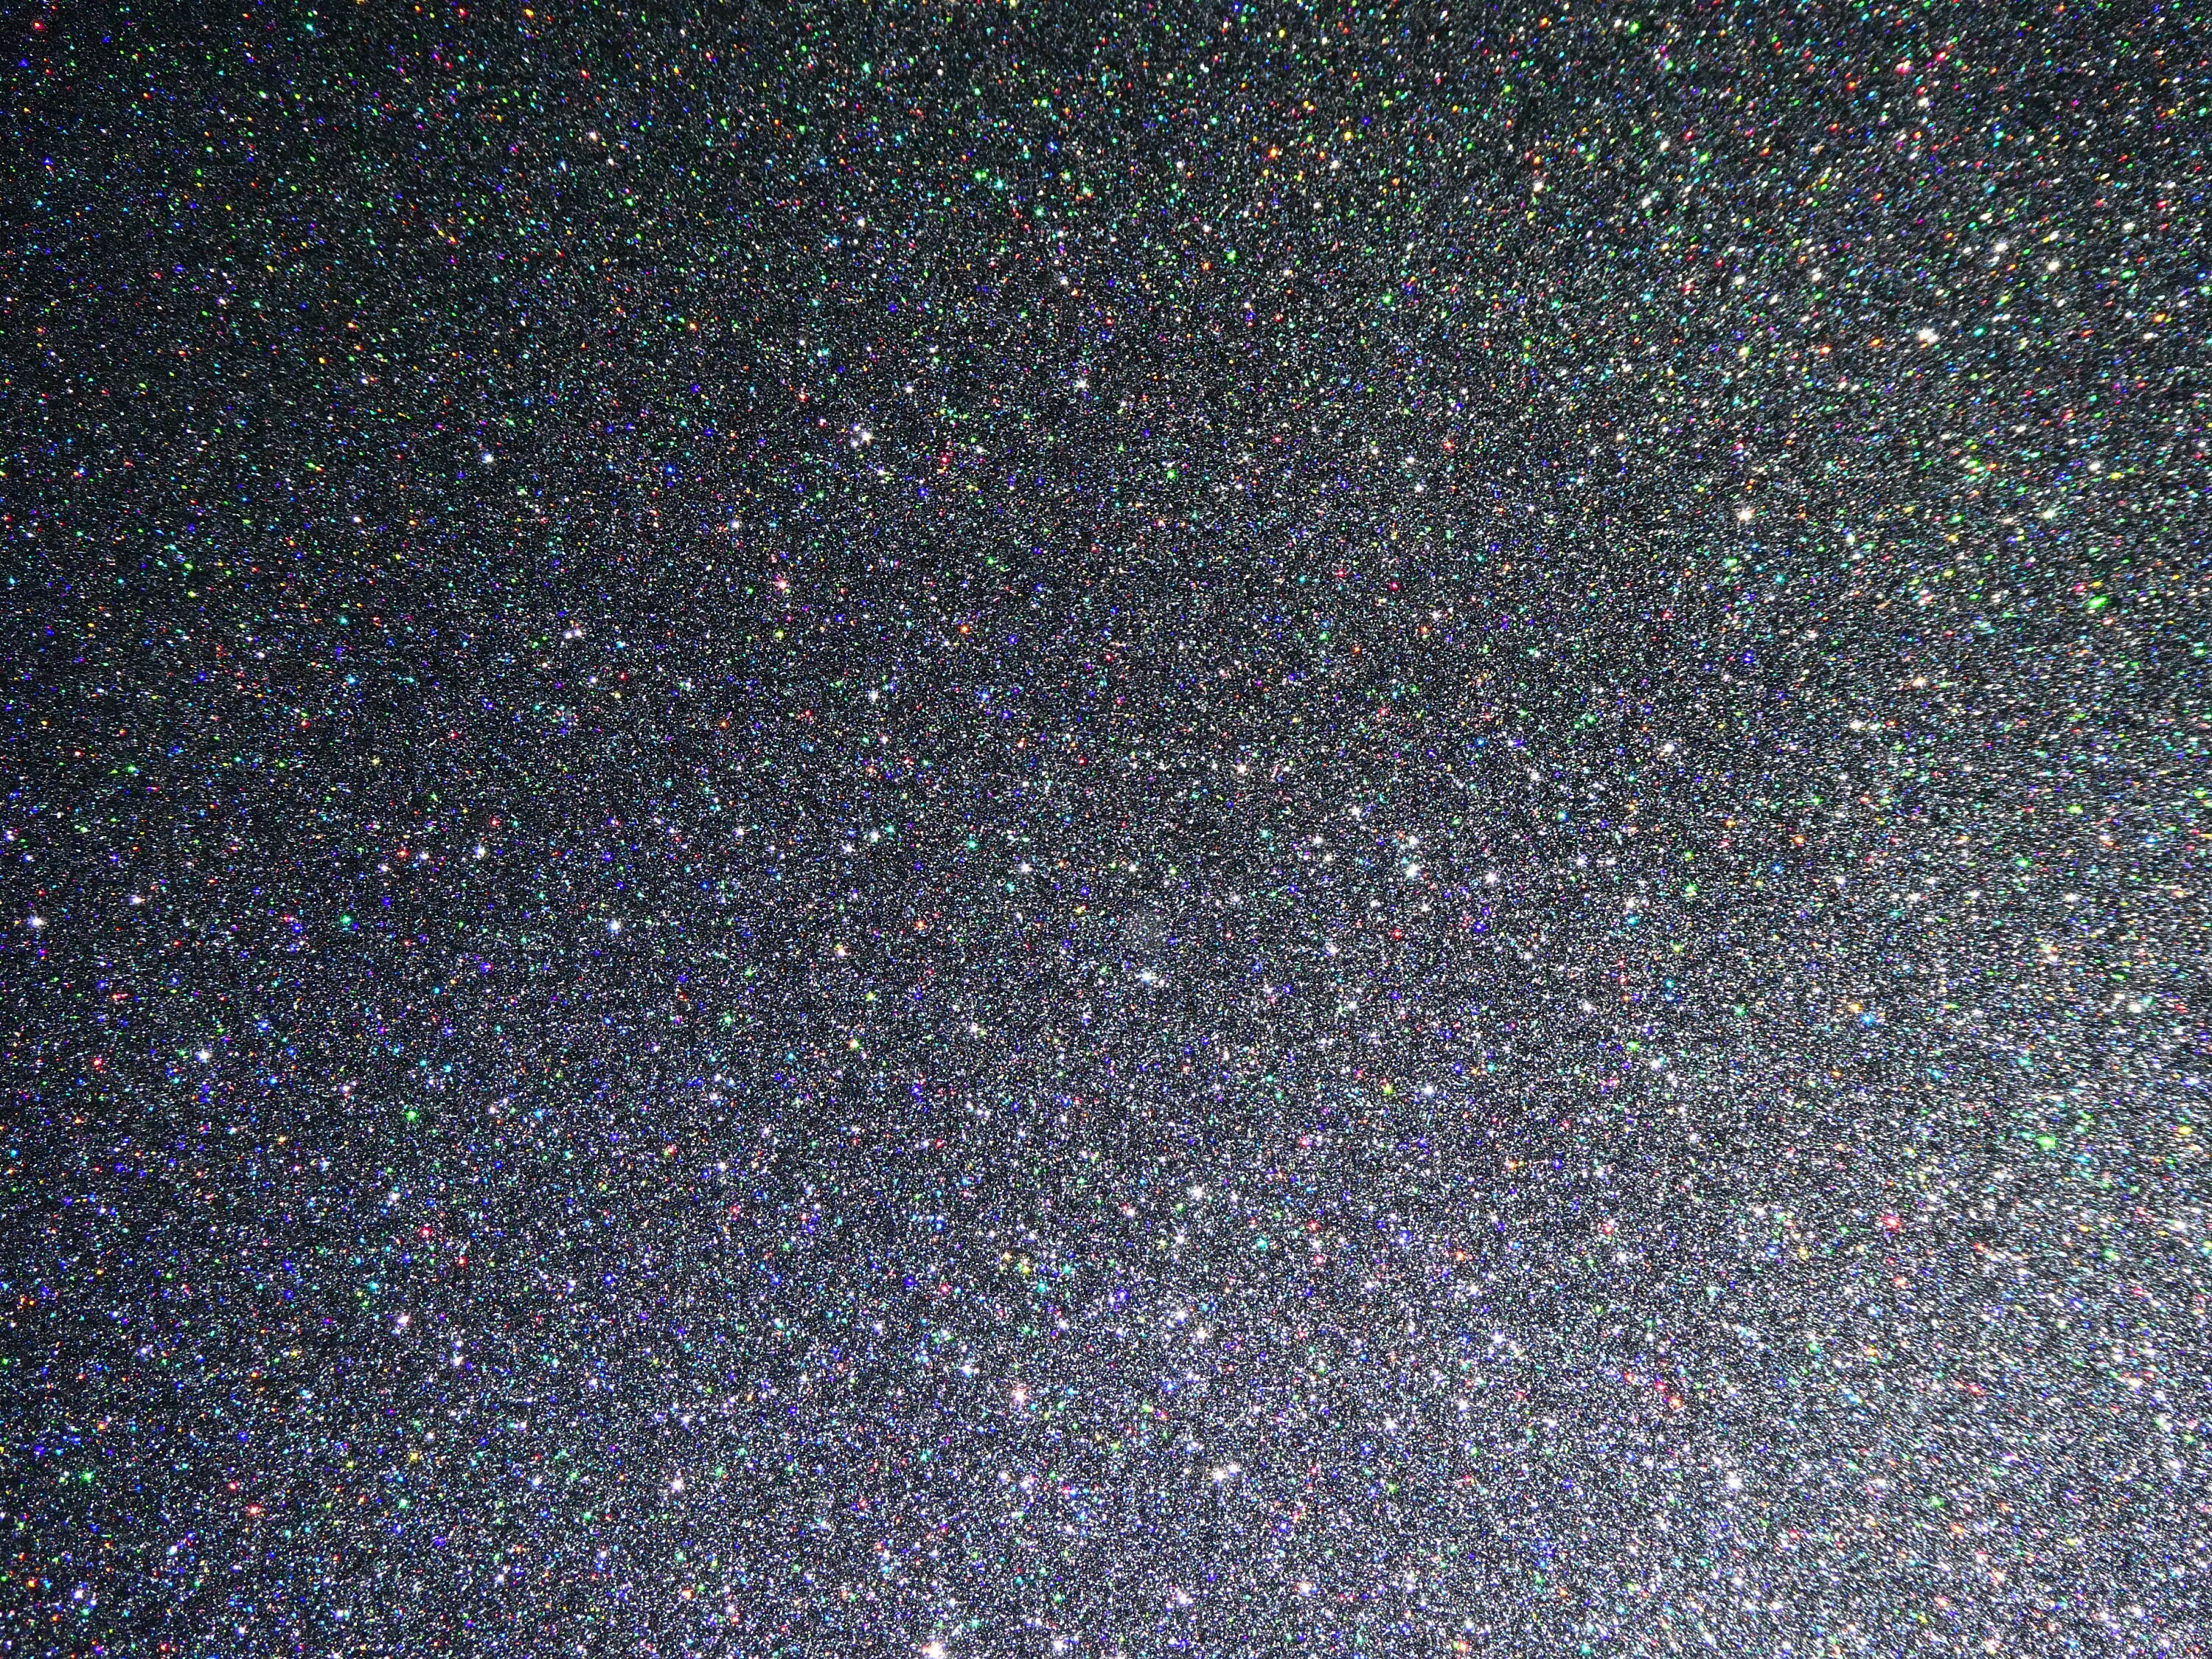 Fine GLITTER 8x10 BLACK applied to Black Cowhide Leather THiCK 5